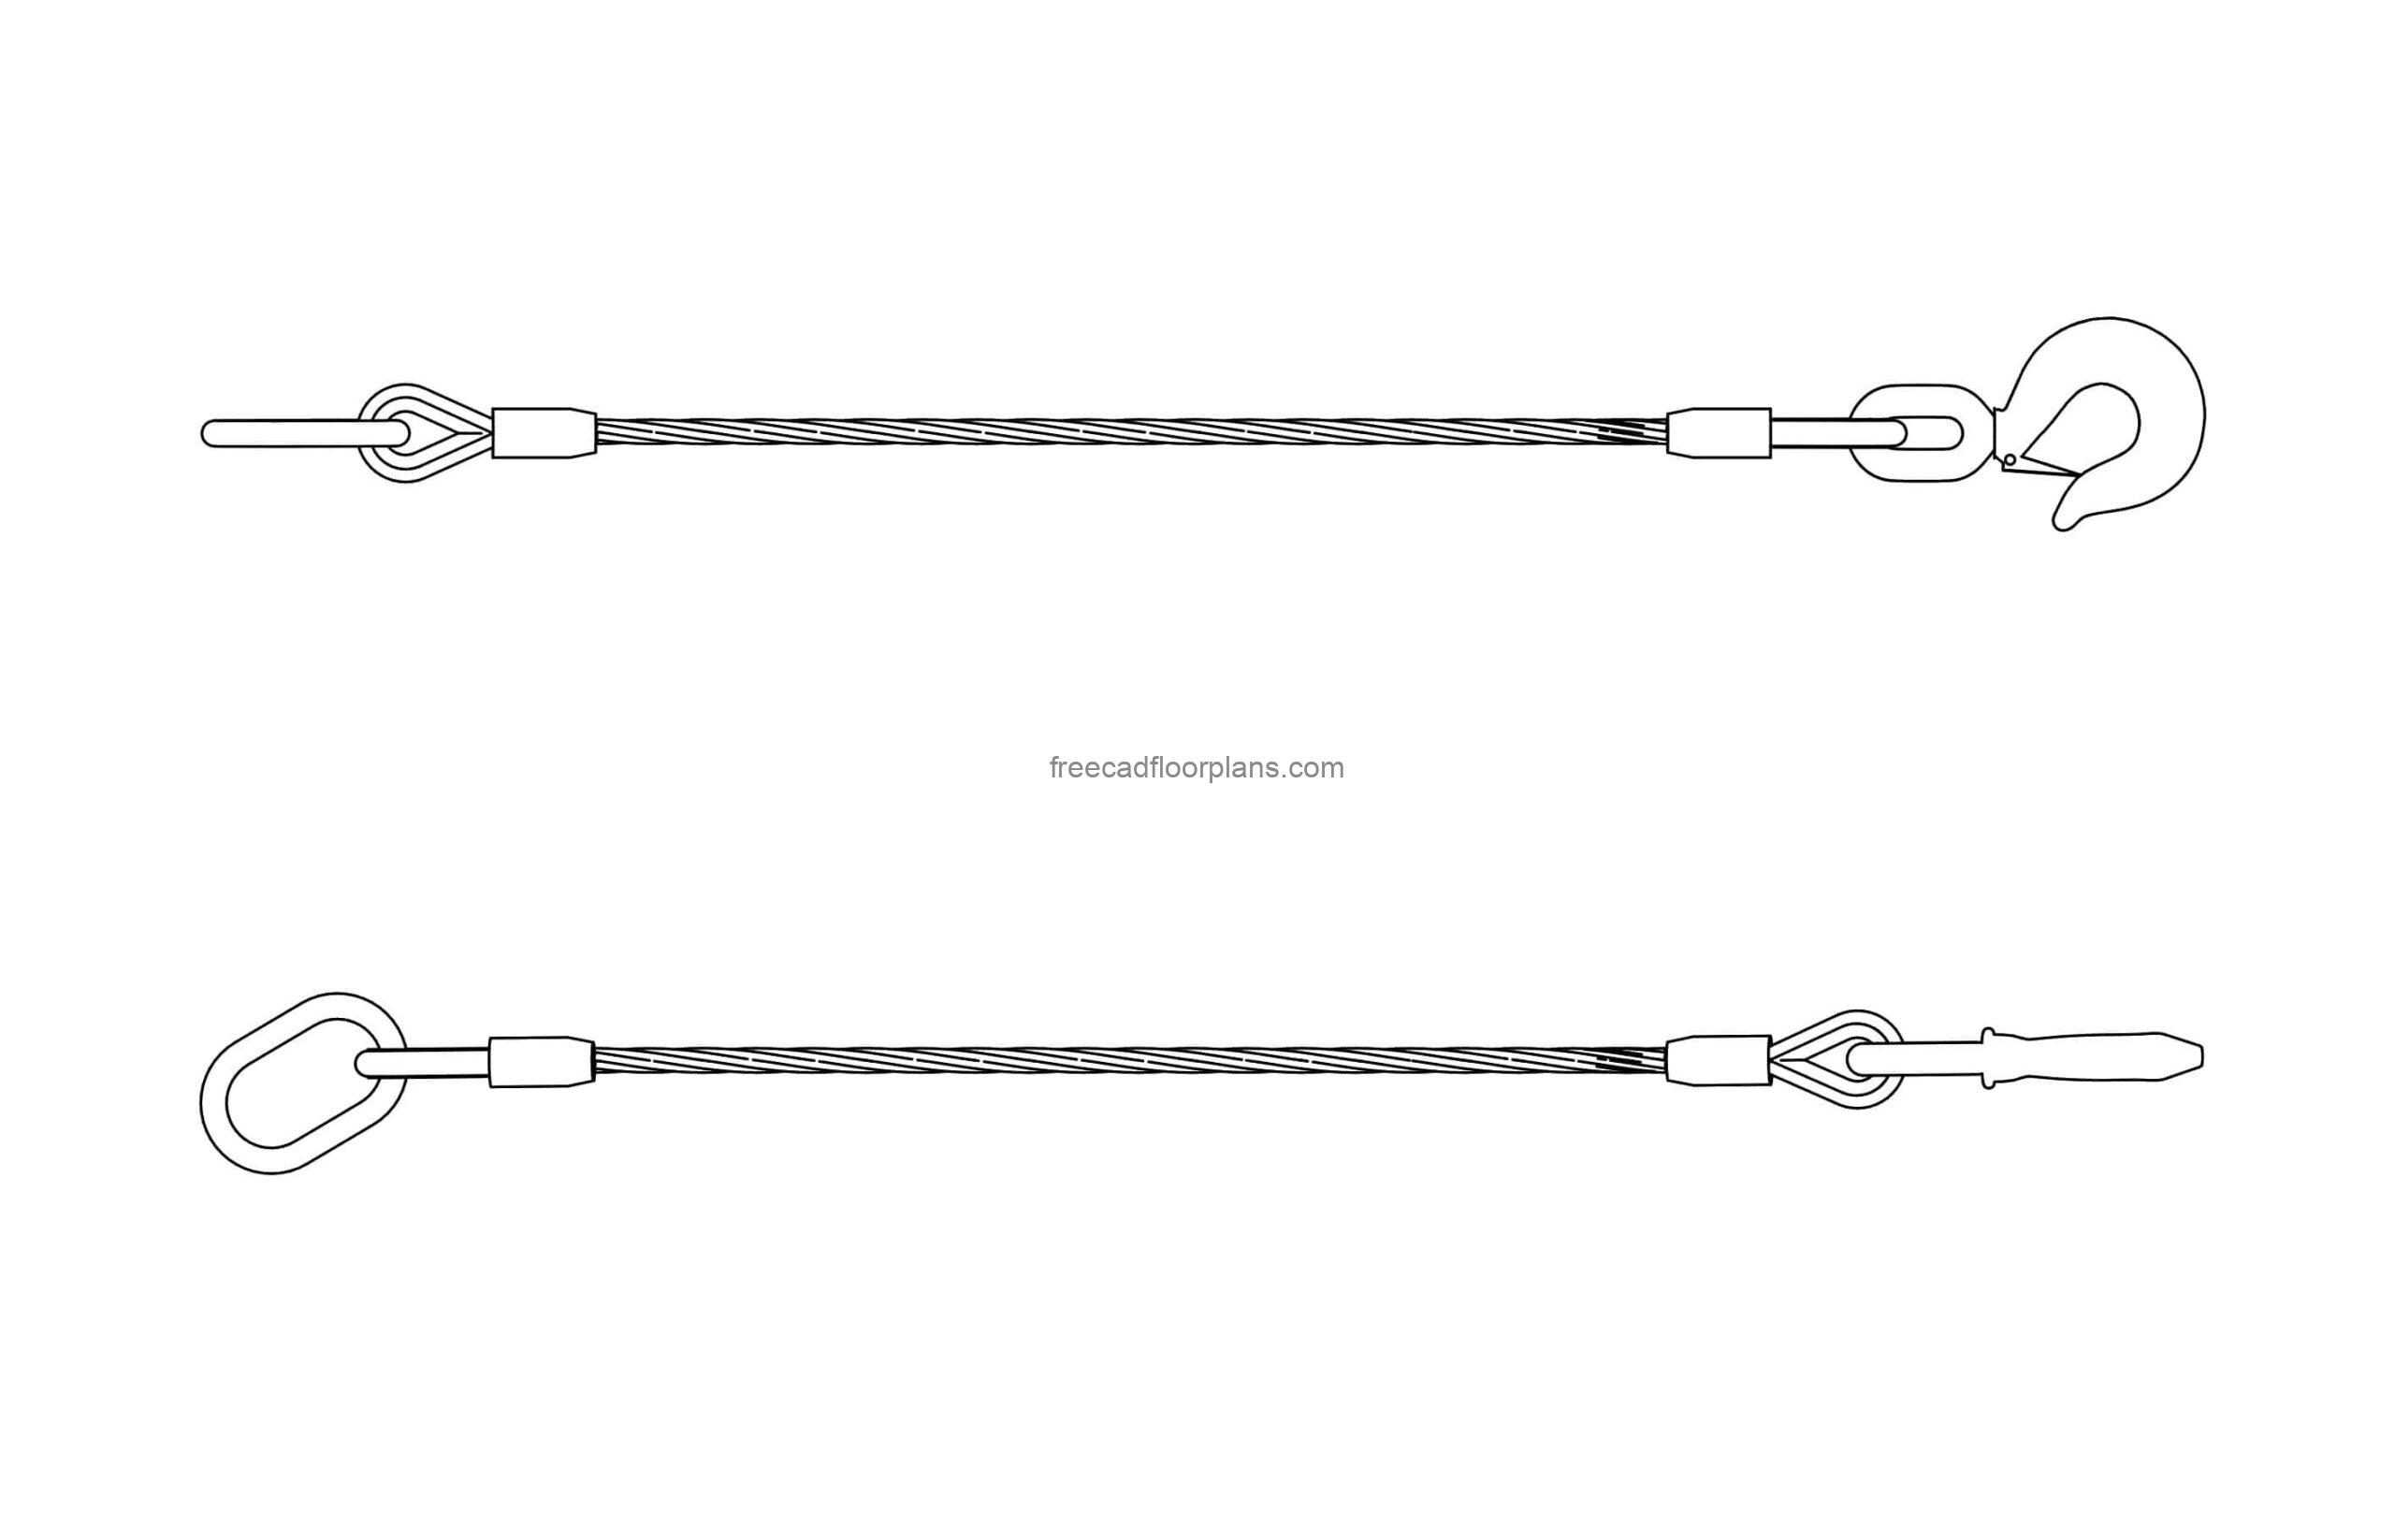 2d autocad drawing of a wire rope, plan and elevations views dwg file for free download